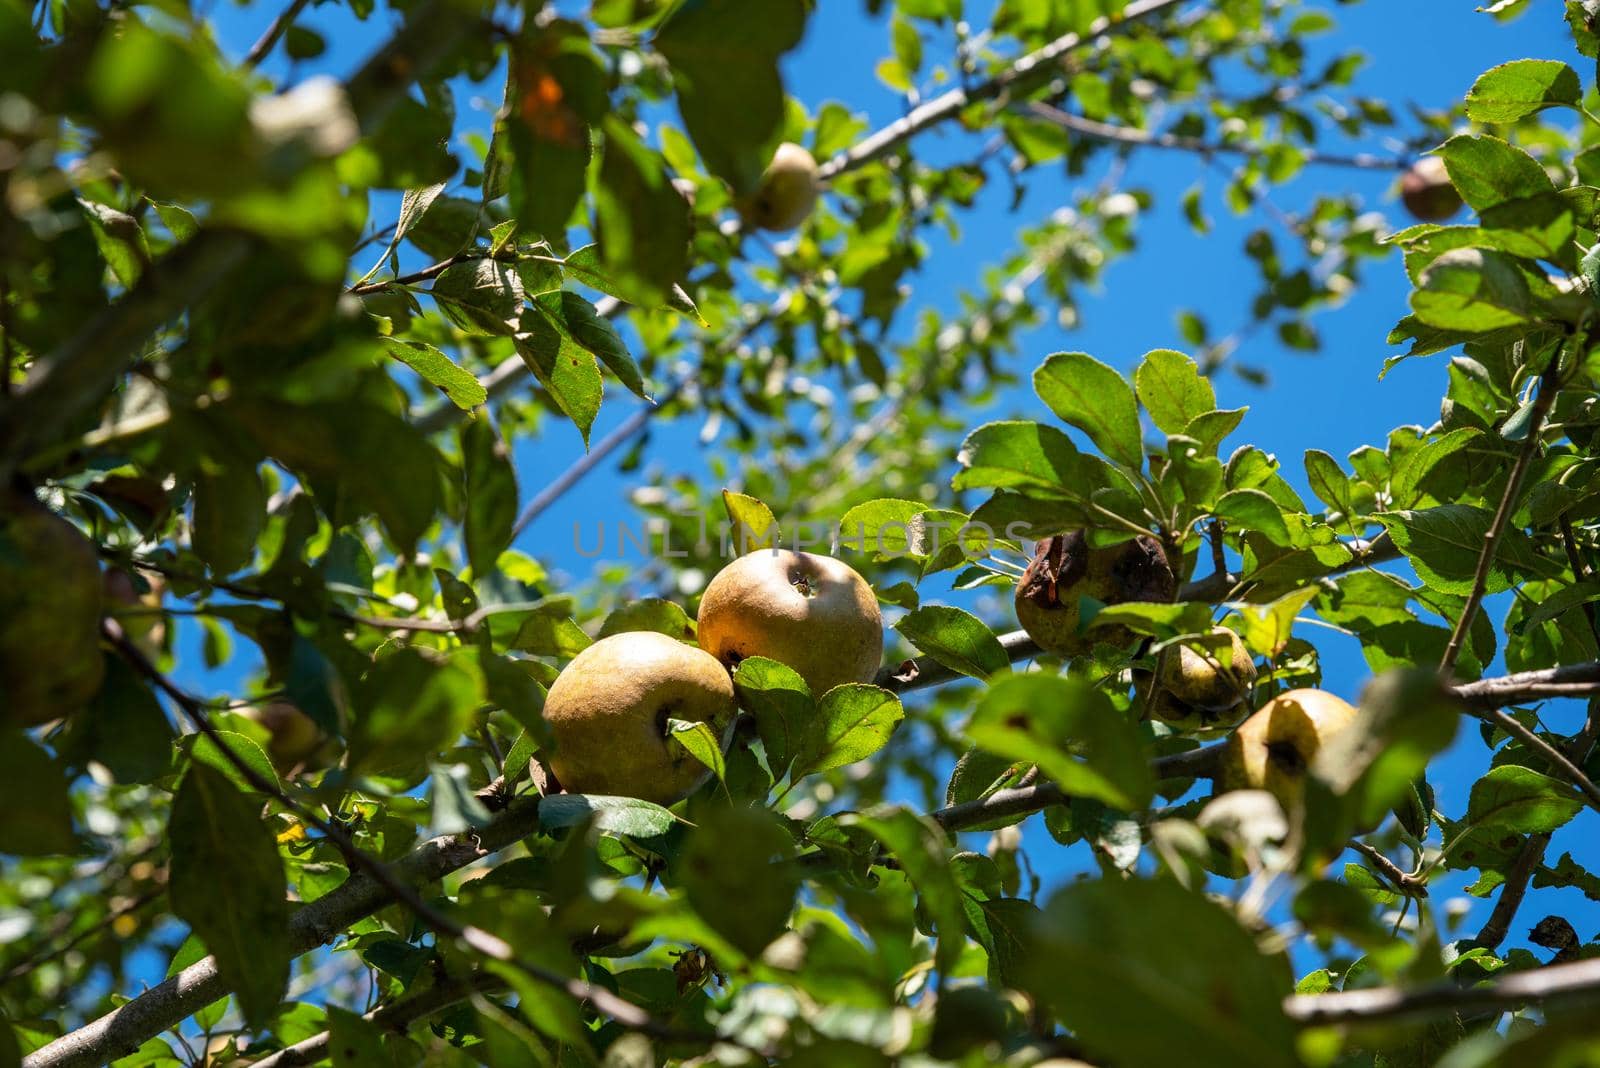 Golden Russet apples on lush green overhead tree branches with blue sky by marysalen